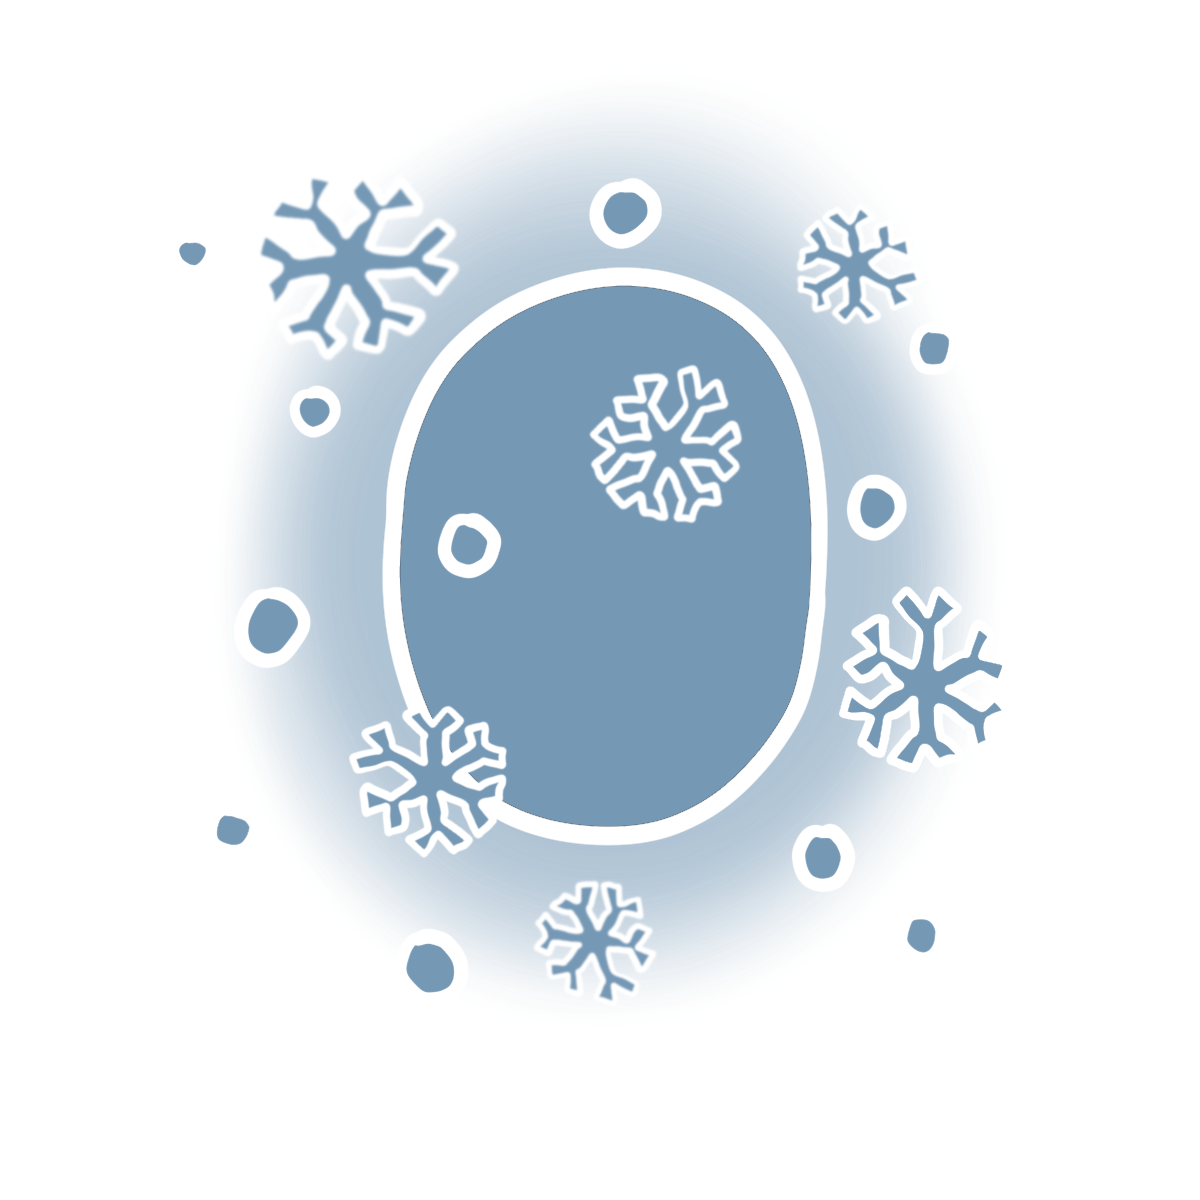 Light blue oval with snowflakes around it.